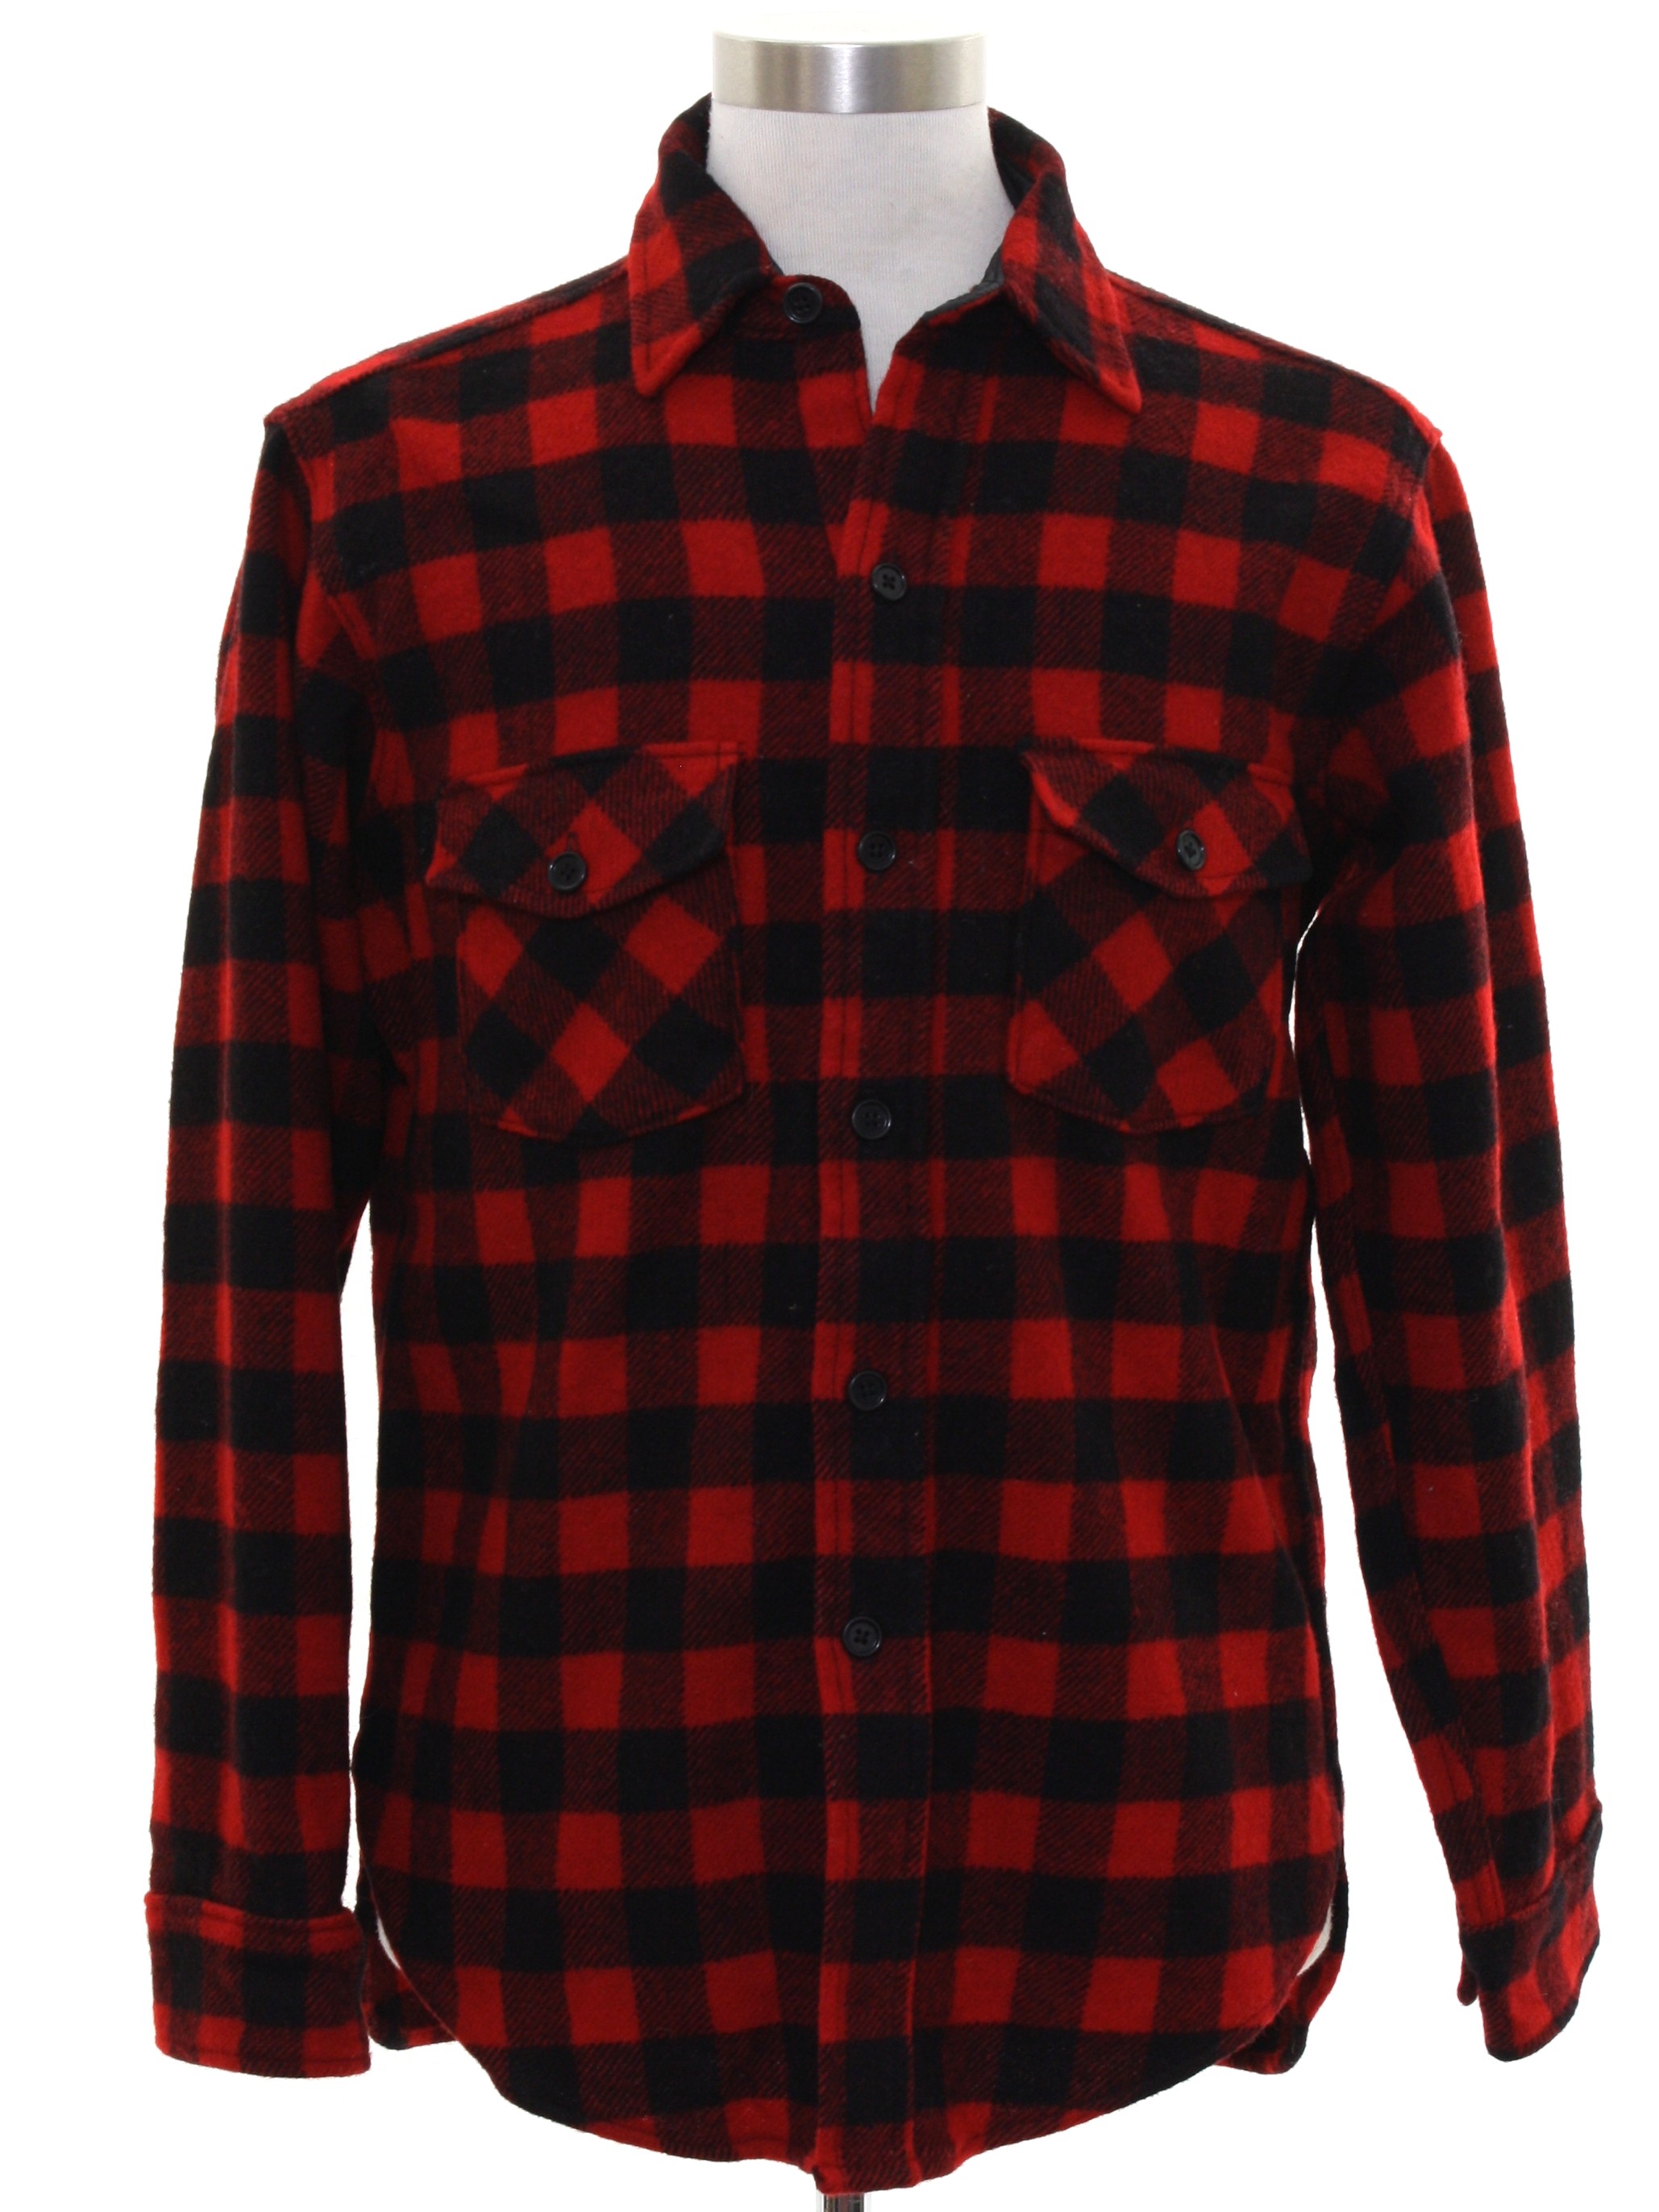 Retro 80's Shirt: 80s -Woolrich- Mens red and black checkered ...